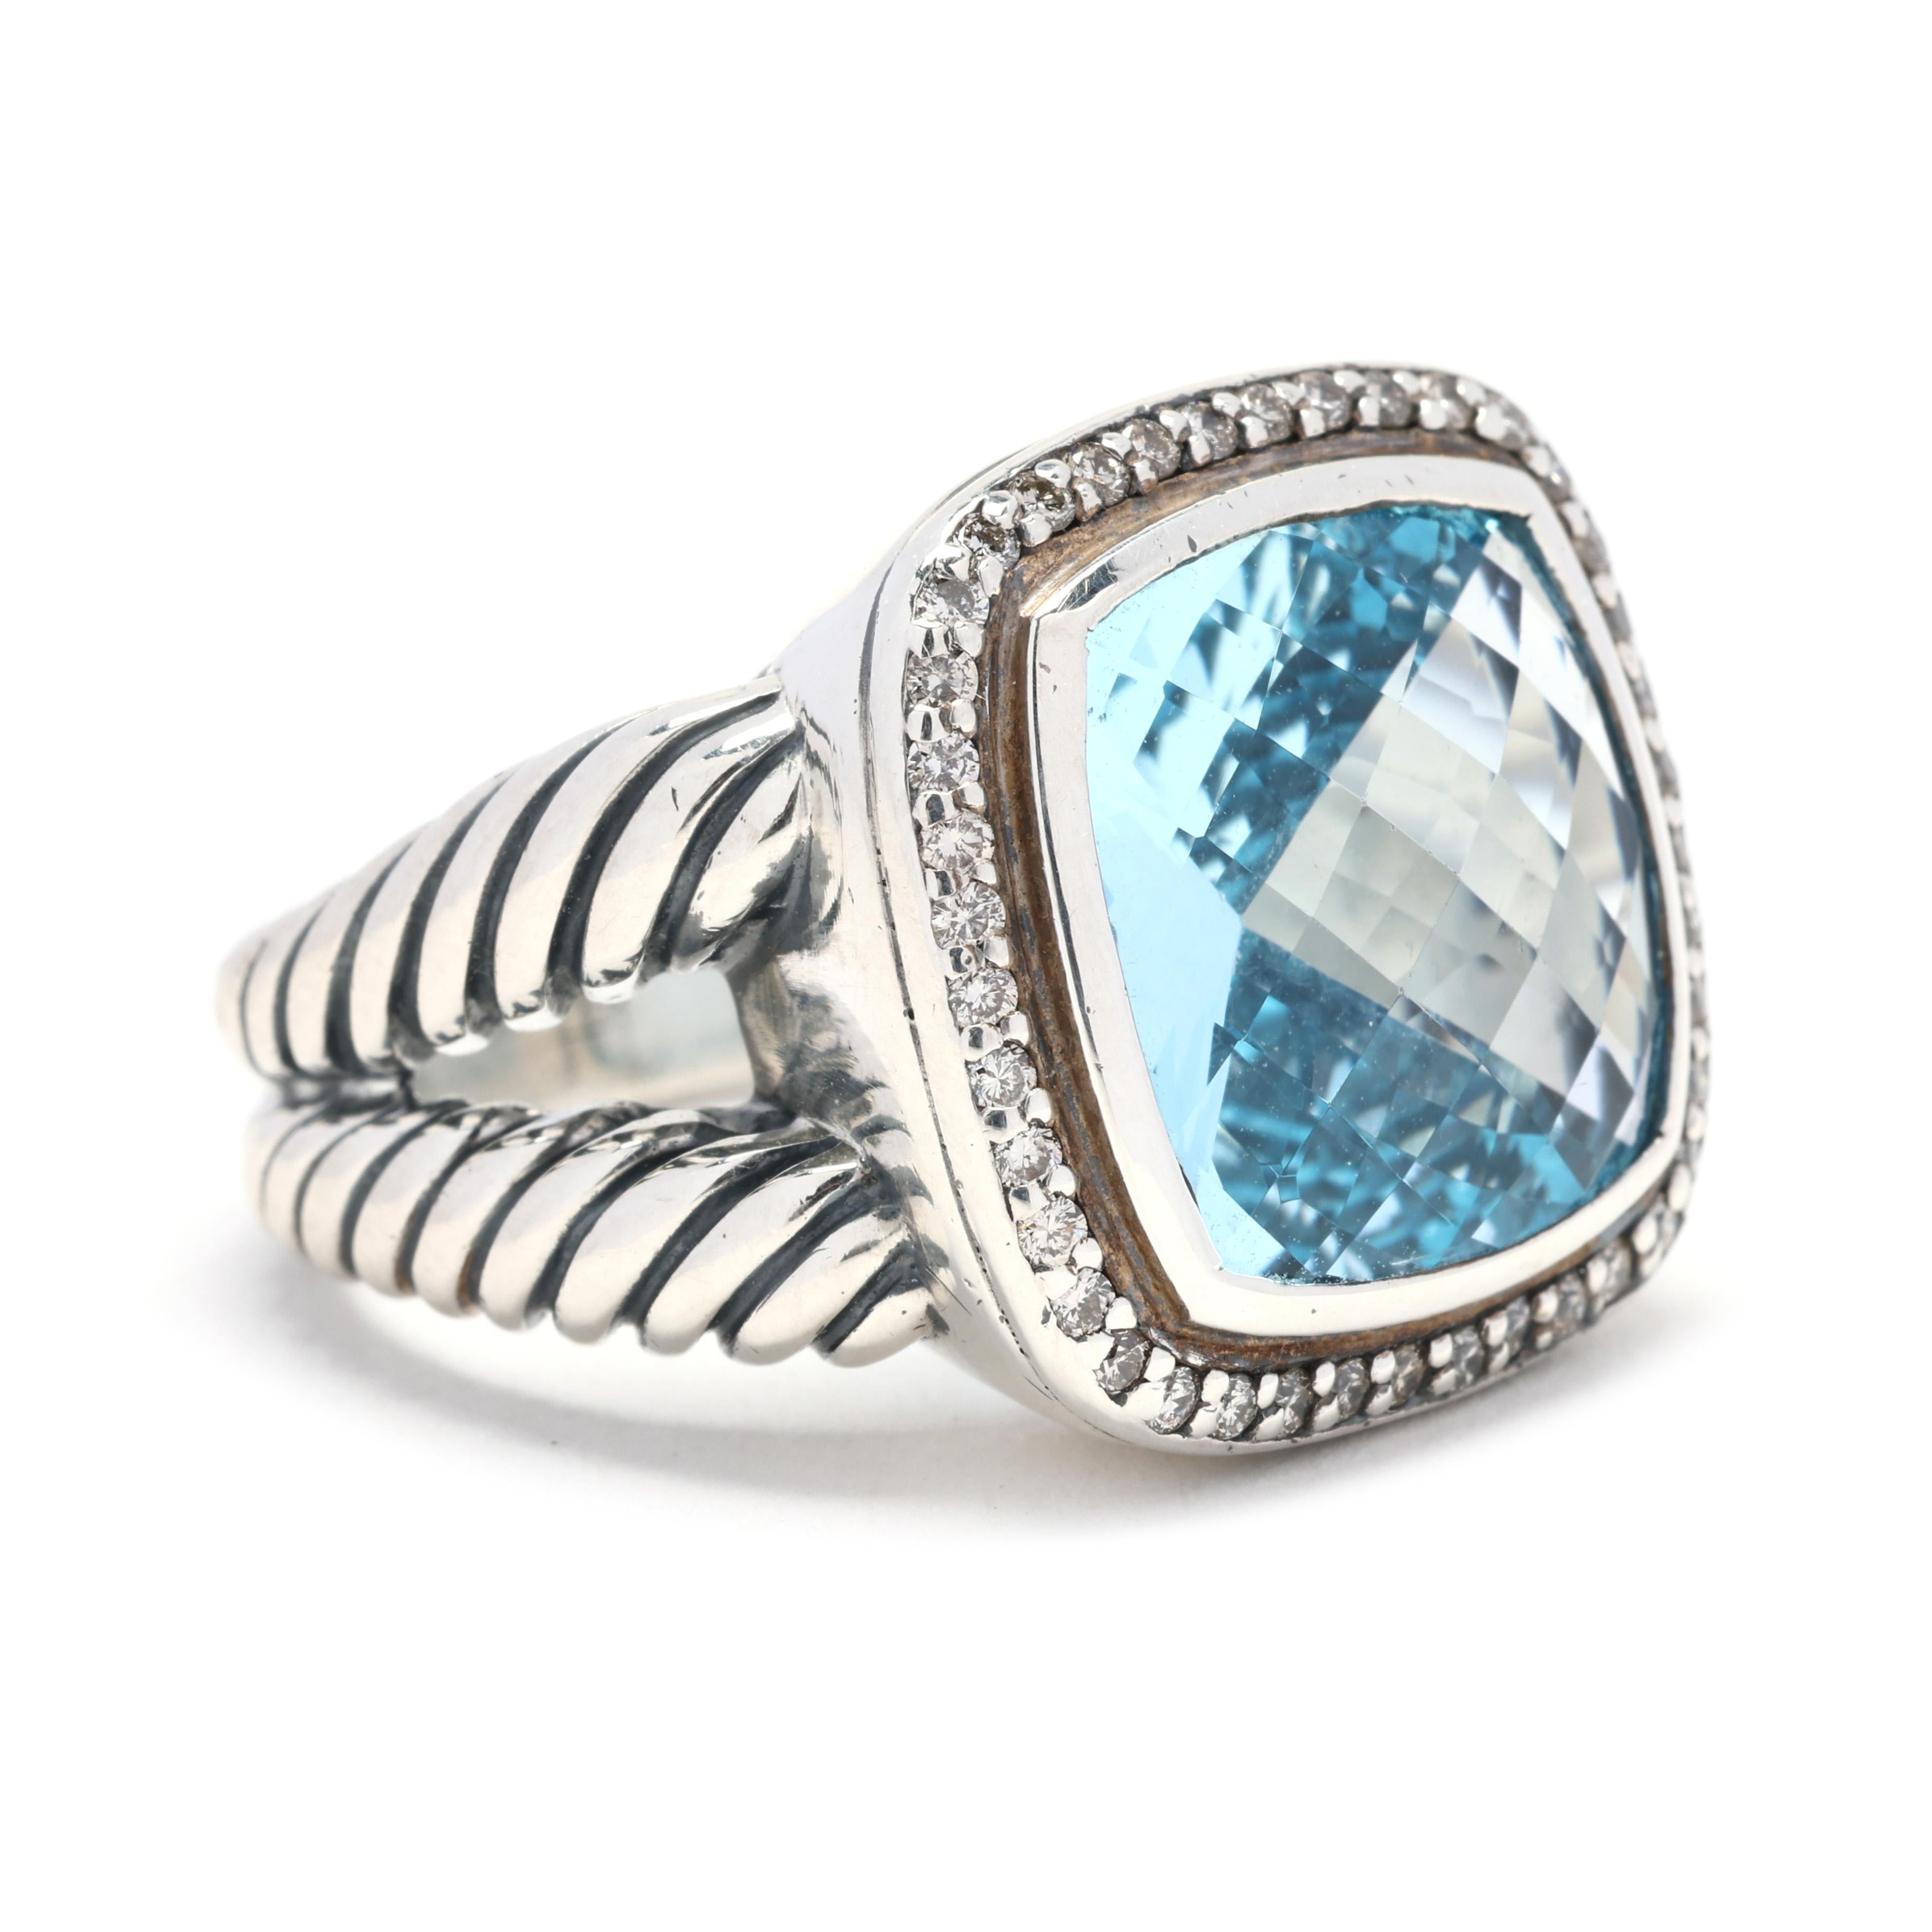 This magnificent 13.85ctw Blue Topaz and Diamond Ring by David Yurman is a true statement piece. The ring is crafted from sterling silver with 18k white gold accents, creating a beautiful contrast. The centerpiece of the ring is a stunning Blue